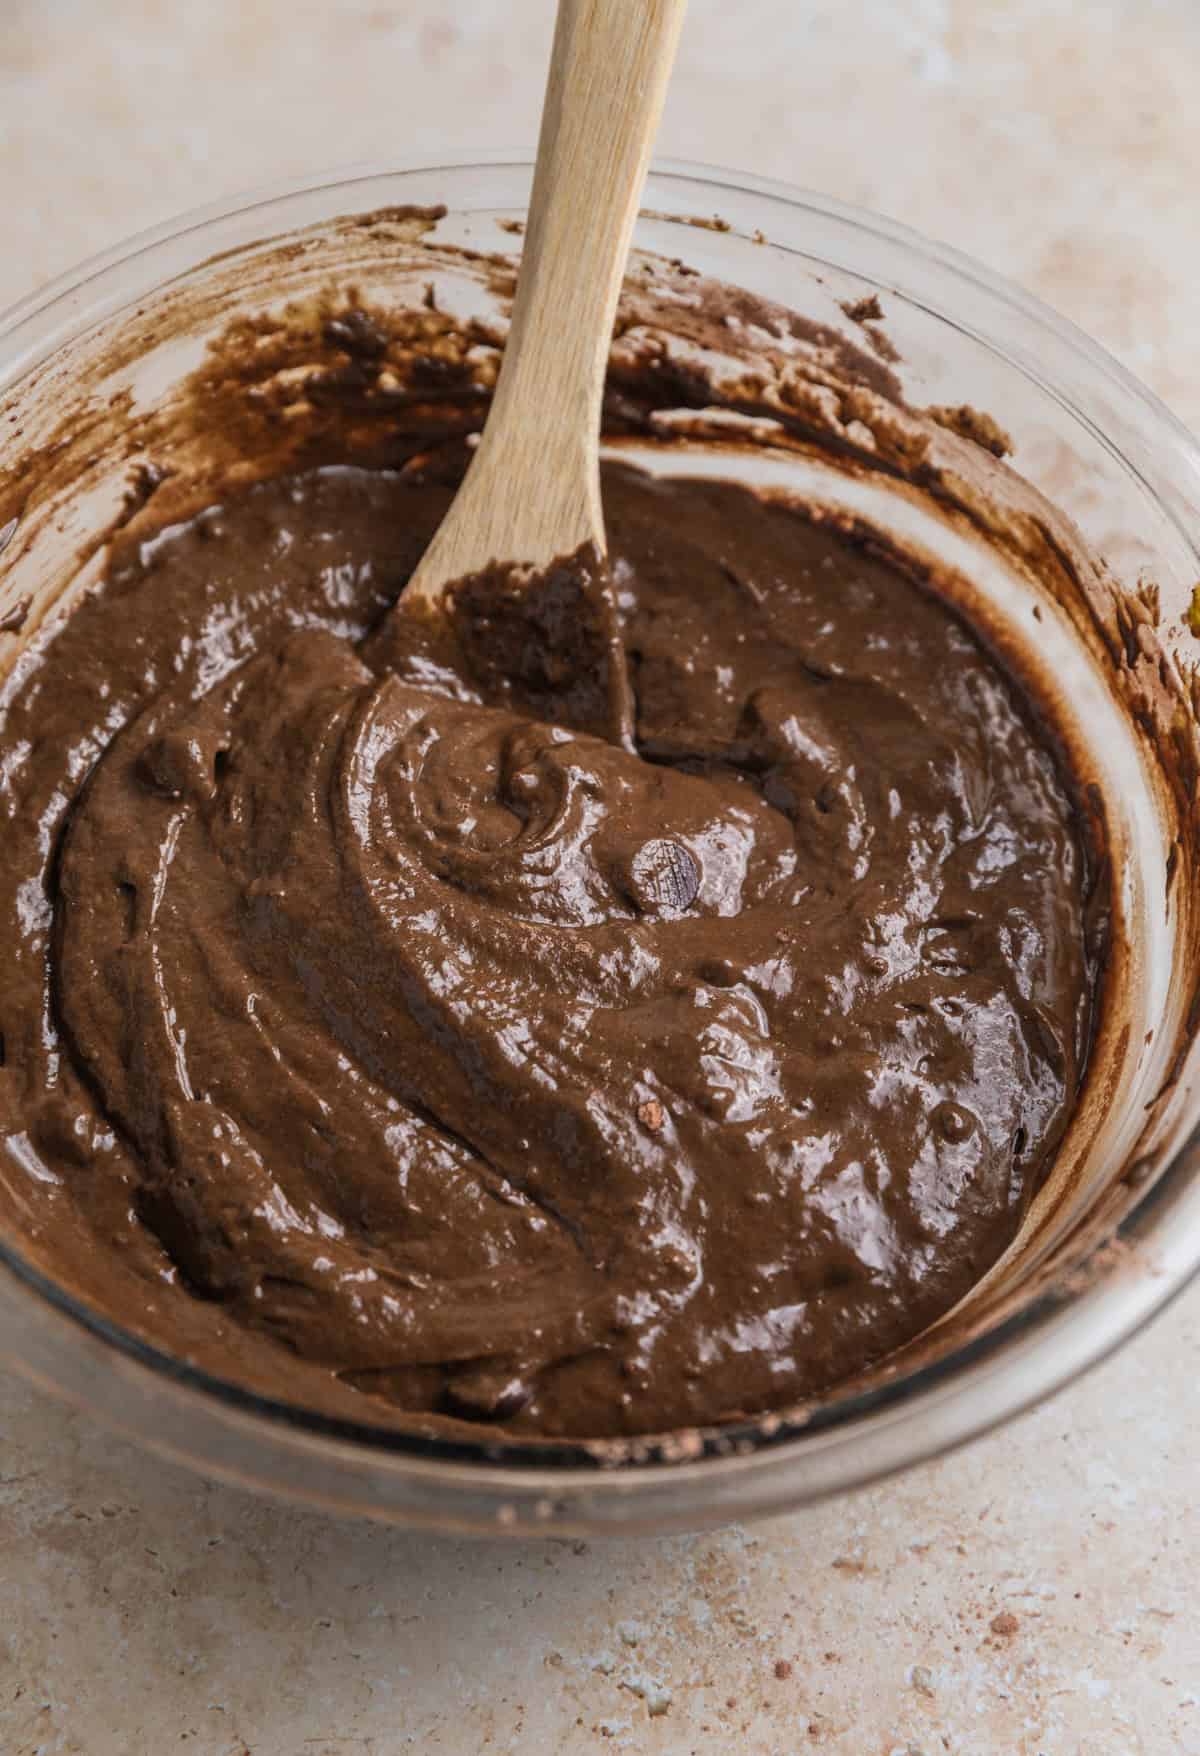 Green smoothie chocolate muffin batter in bowl.